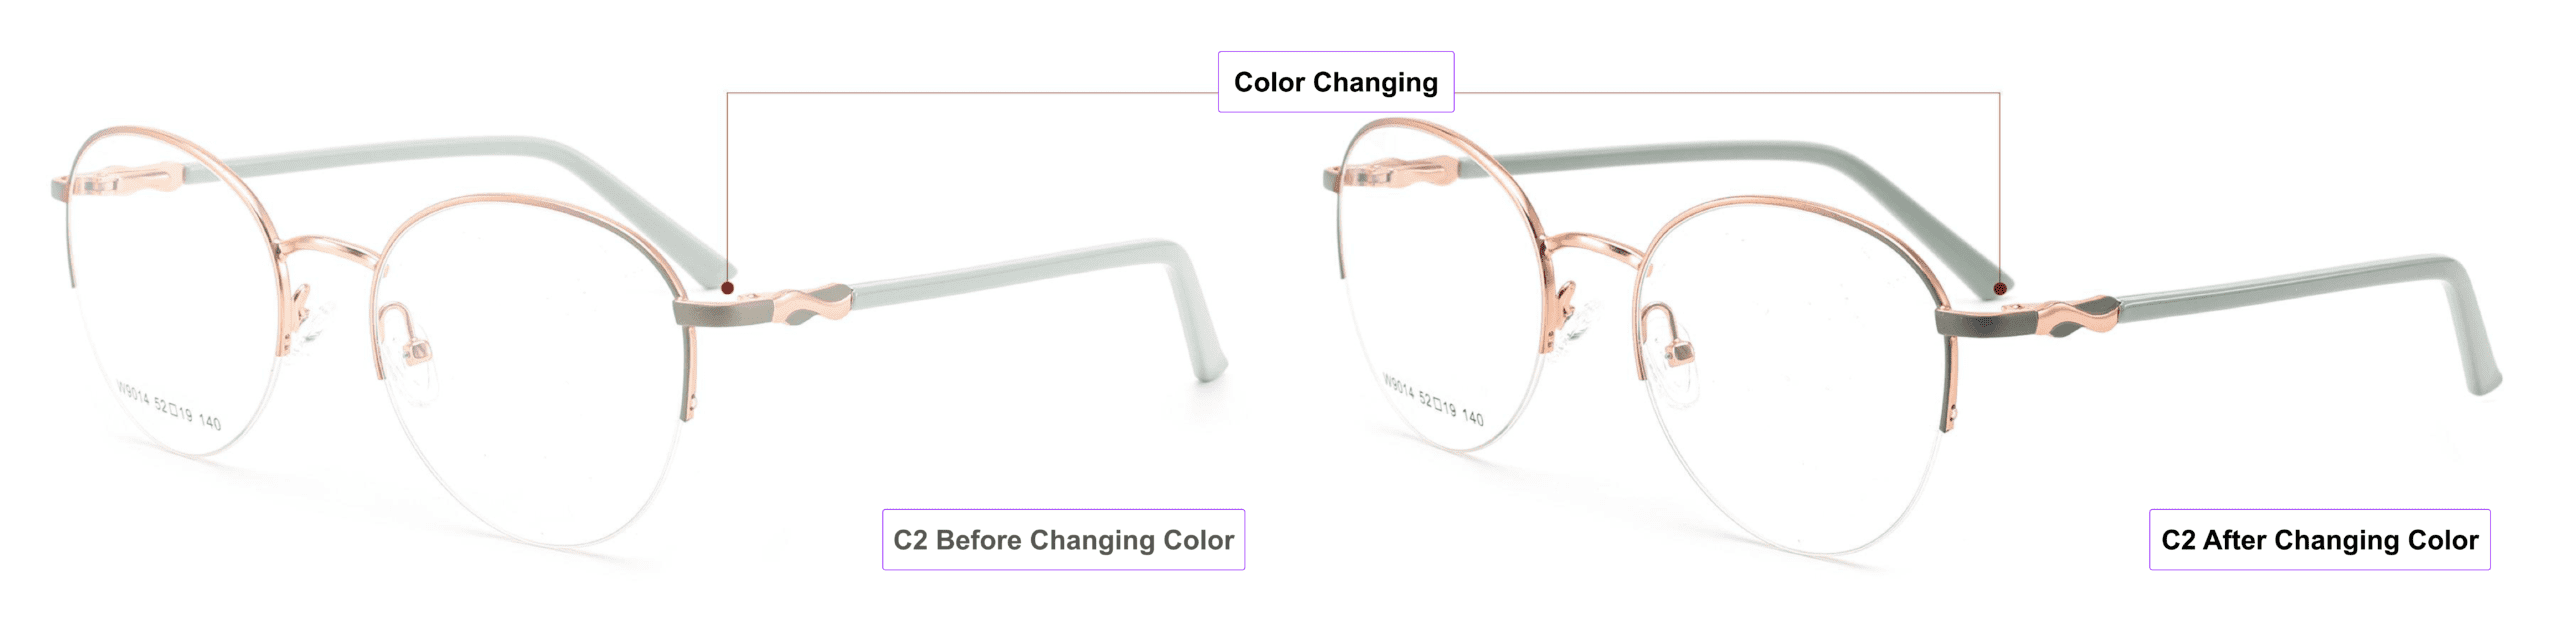 UV-activated Color Changing Glasses Frames, mist blue, gold, process of color changing